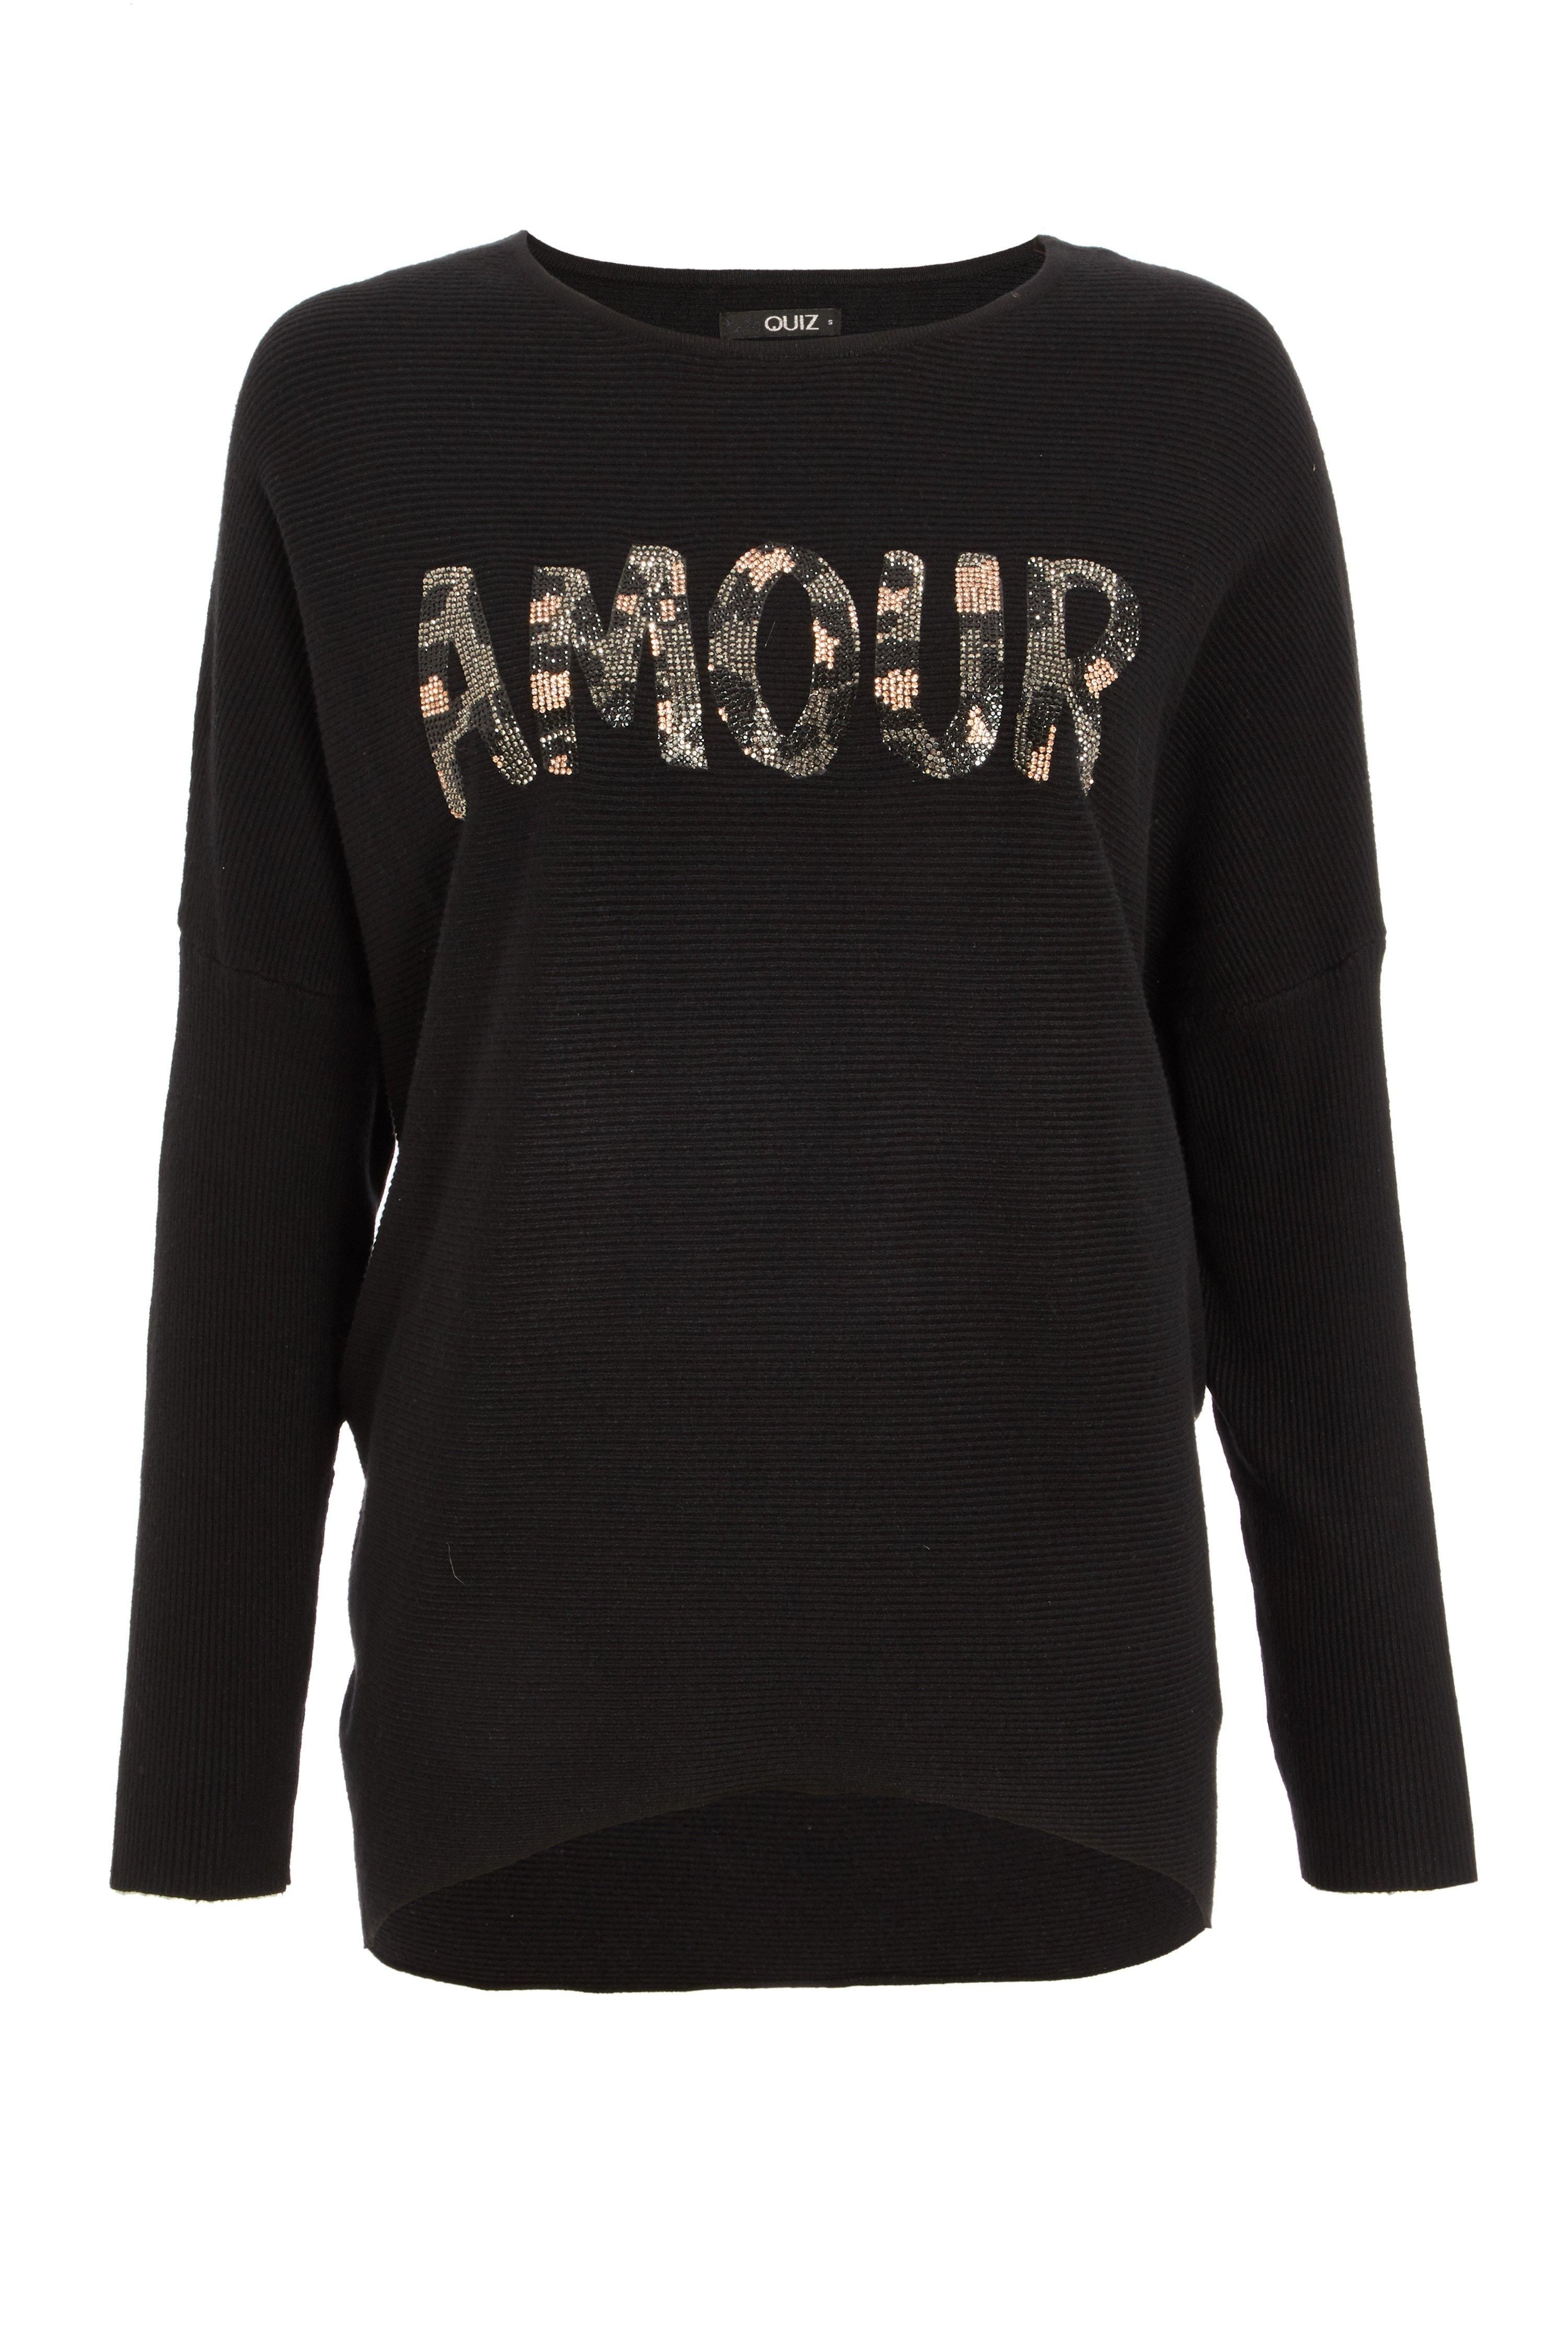 - Knitted jumper  - 'Amour' slogan  - Sequin detail  - Round neck  - Ribbed finish  - Length: 60cm approx  - Model Height: 5' 9